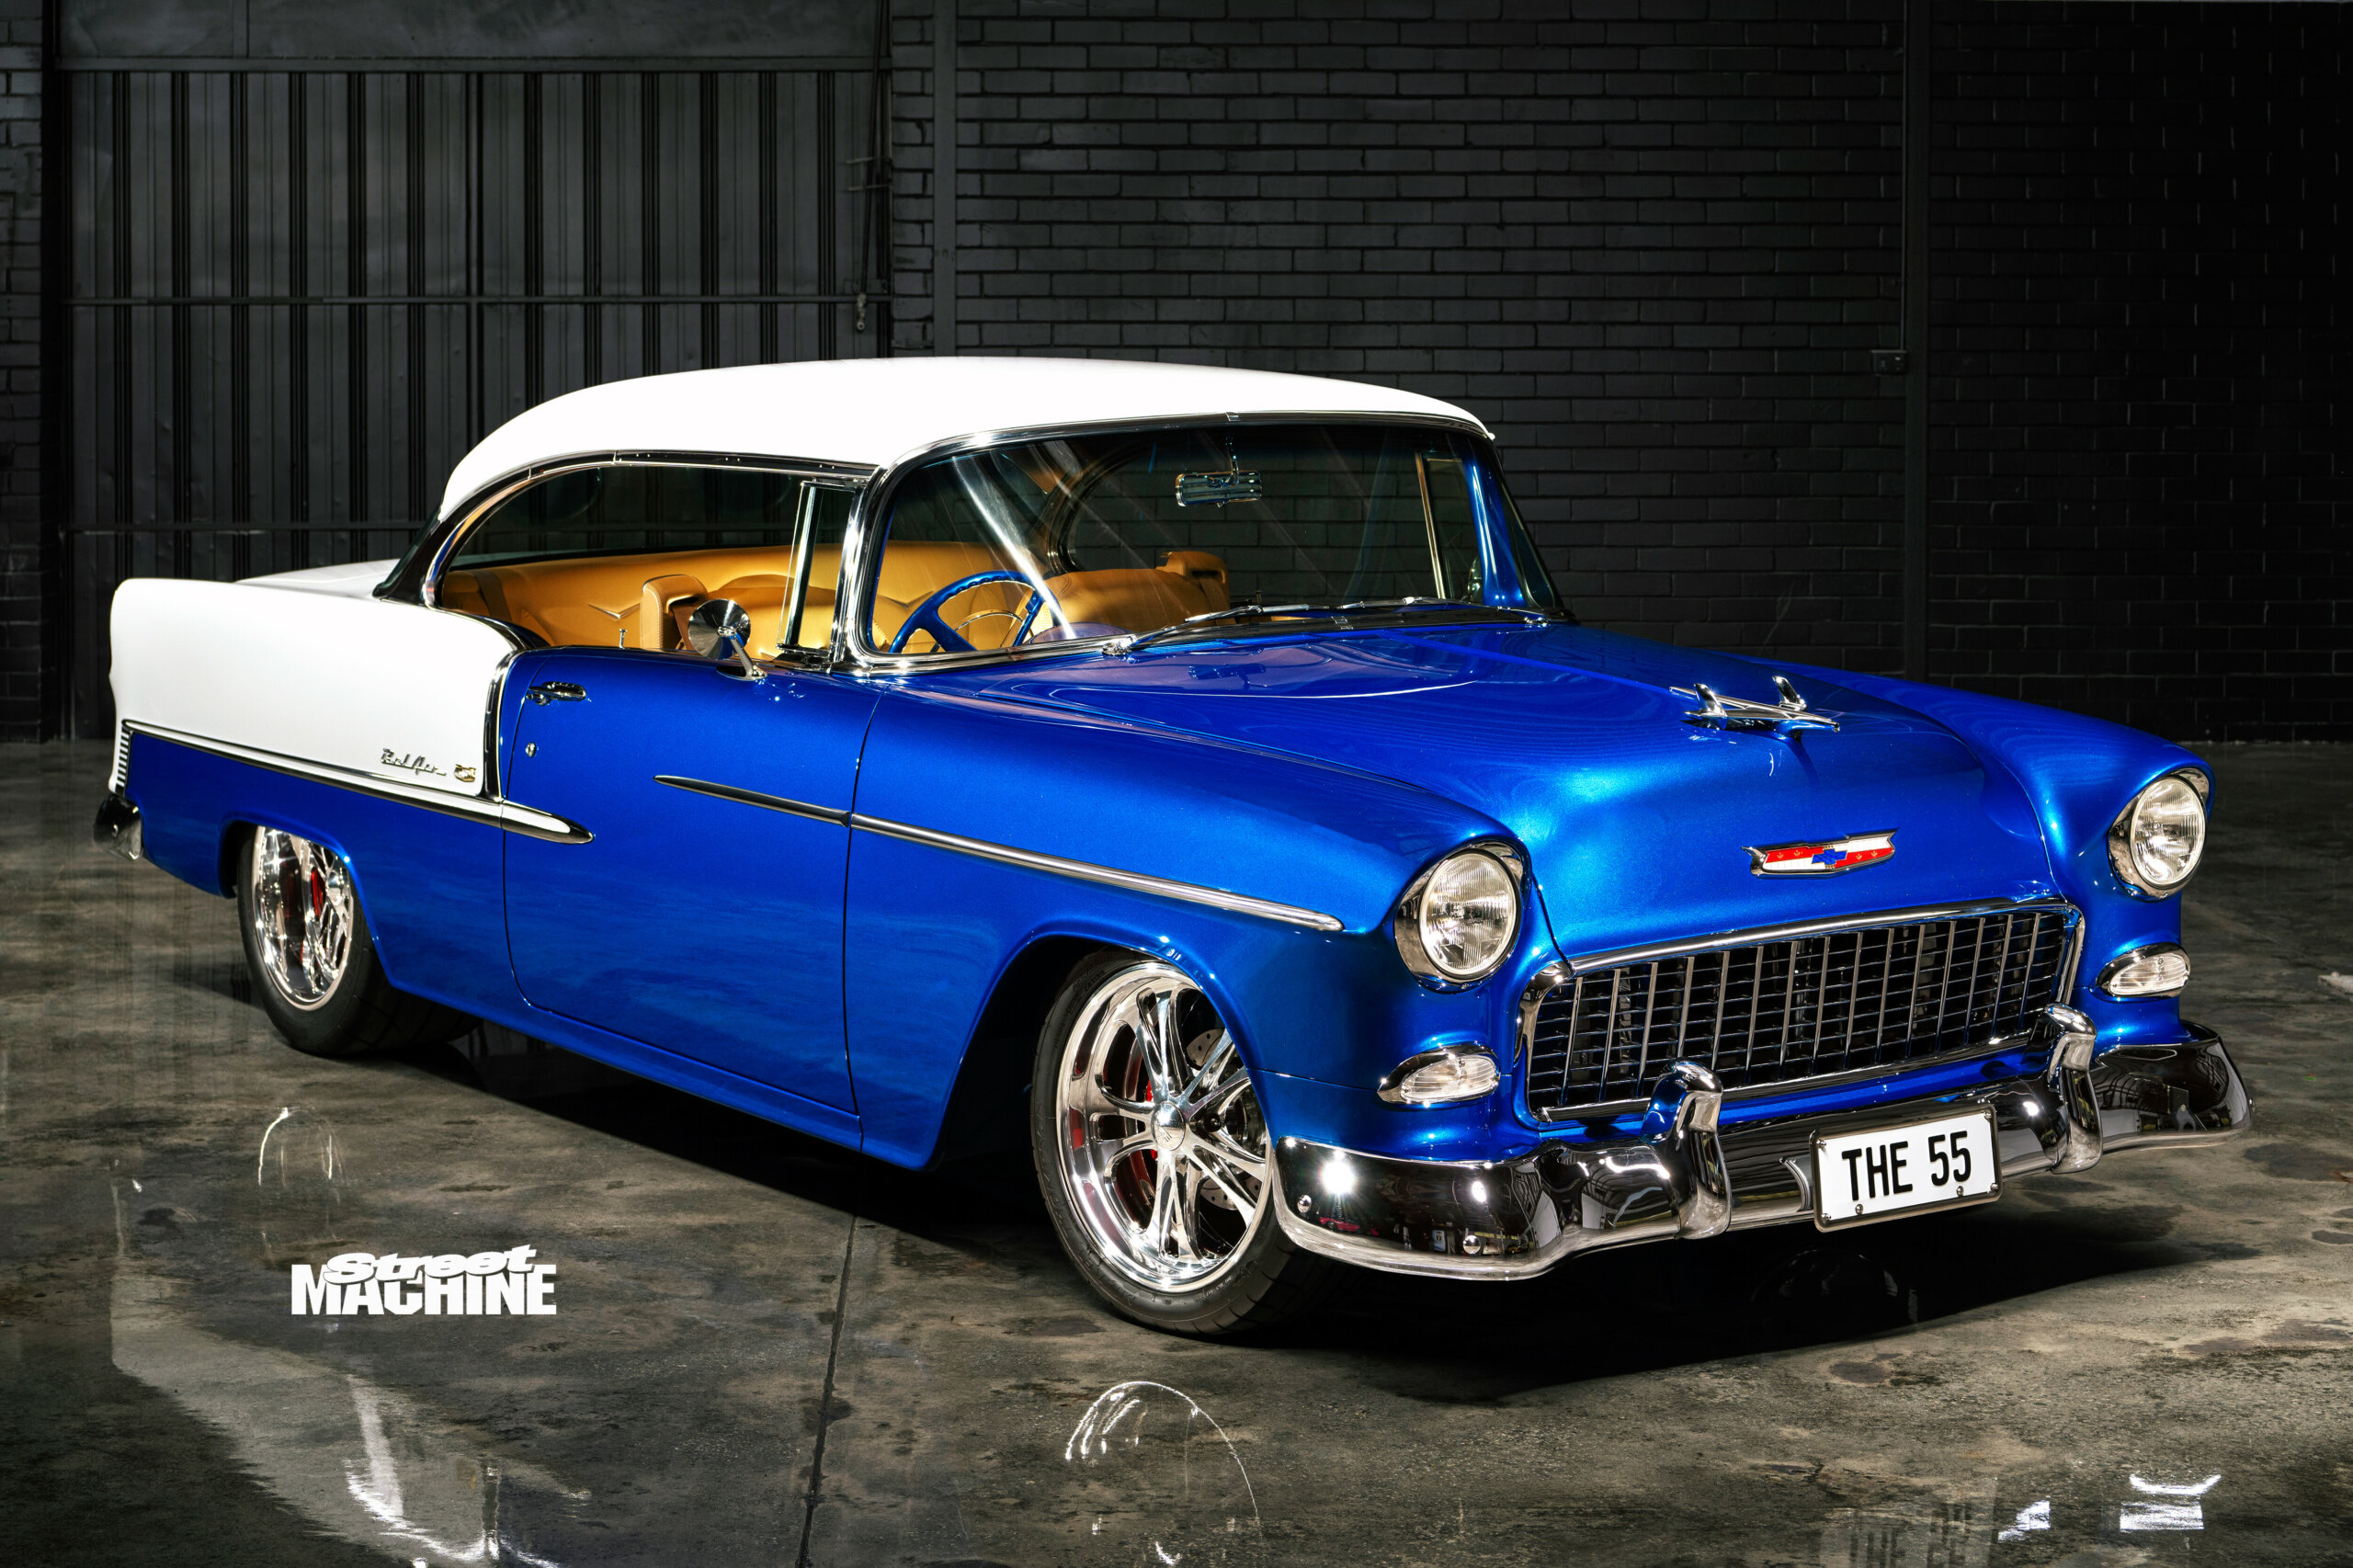 Pro Cruiser: 1955 Chev Bel Air Sports coupe